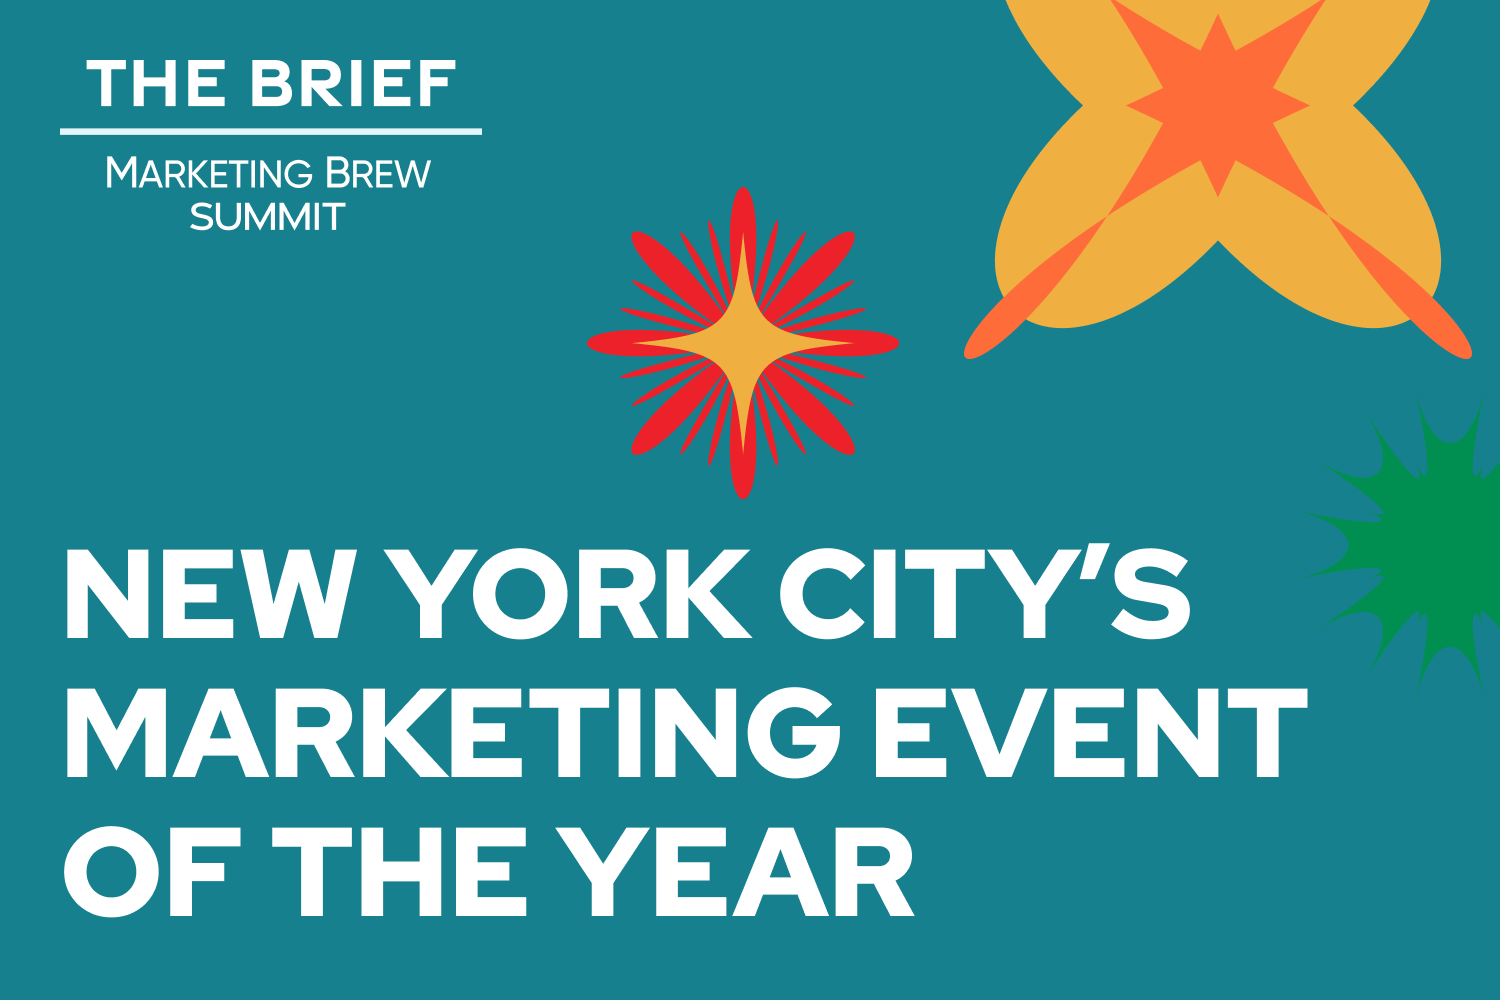 The Brief logo and "New York City's Marketing Event of the Year" text at the bottom